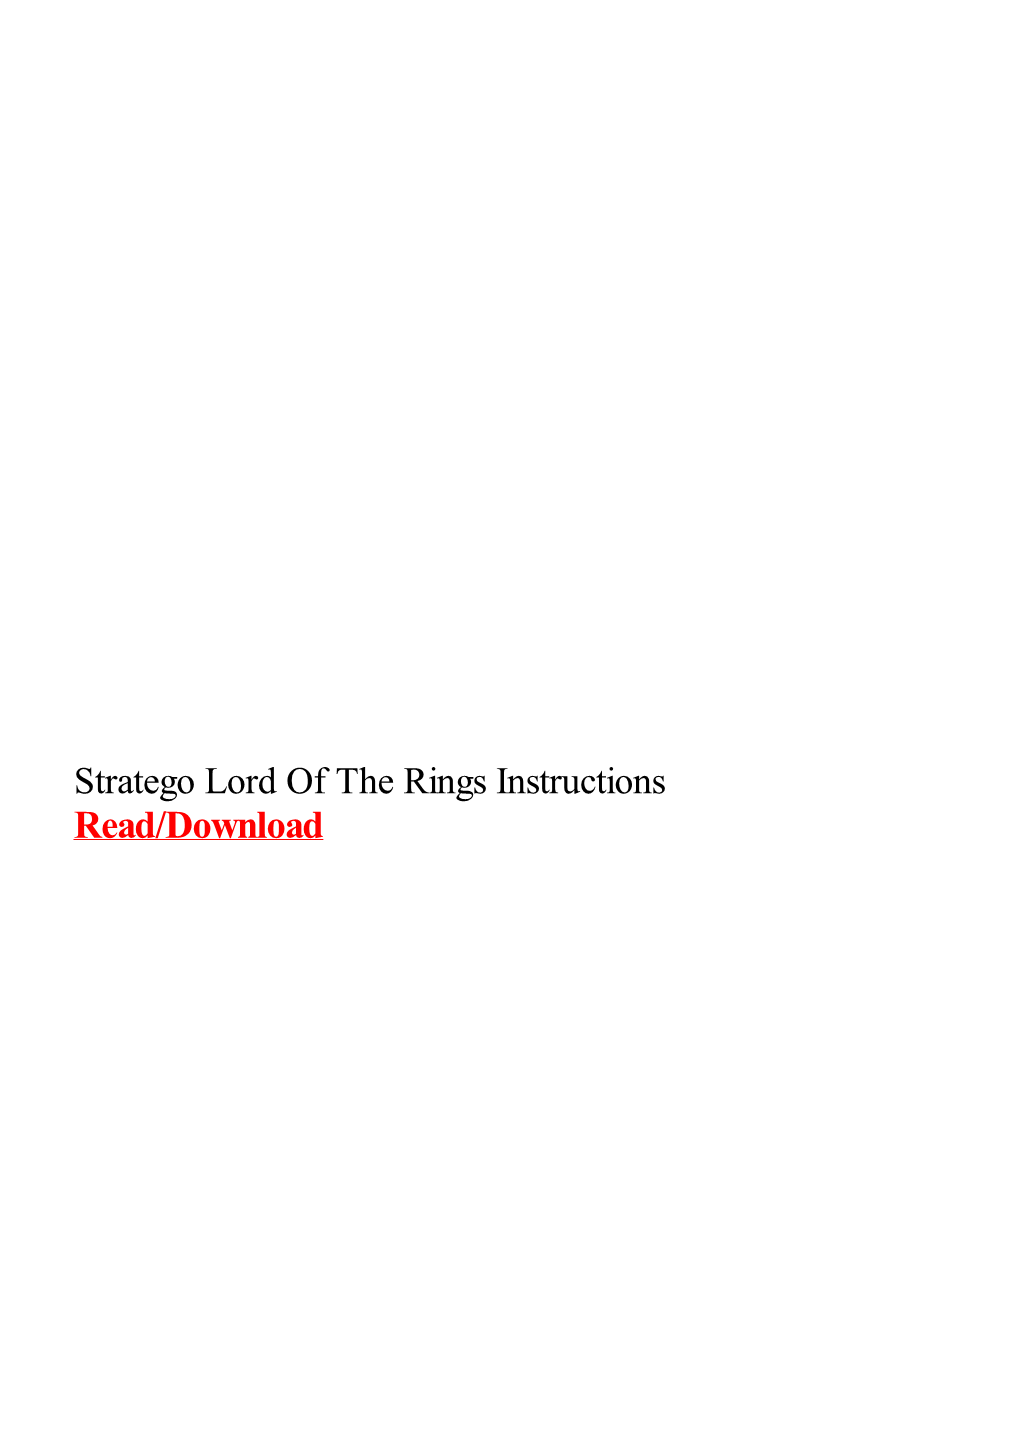 Stratego Lord of the Rings Instructions.Pdf